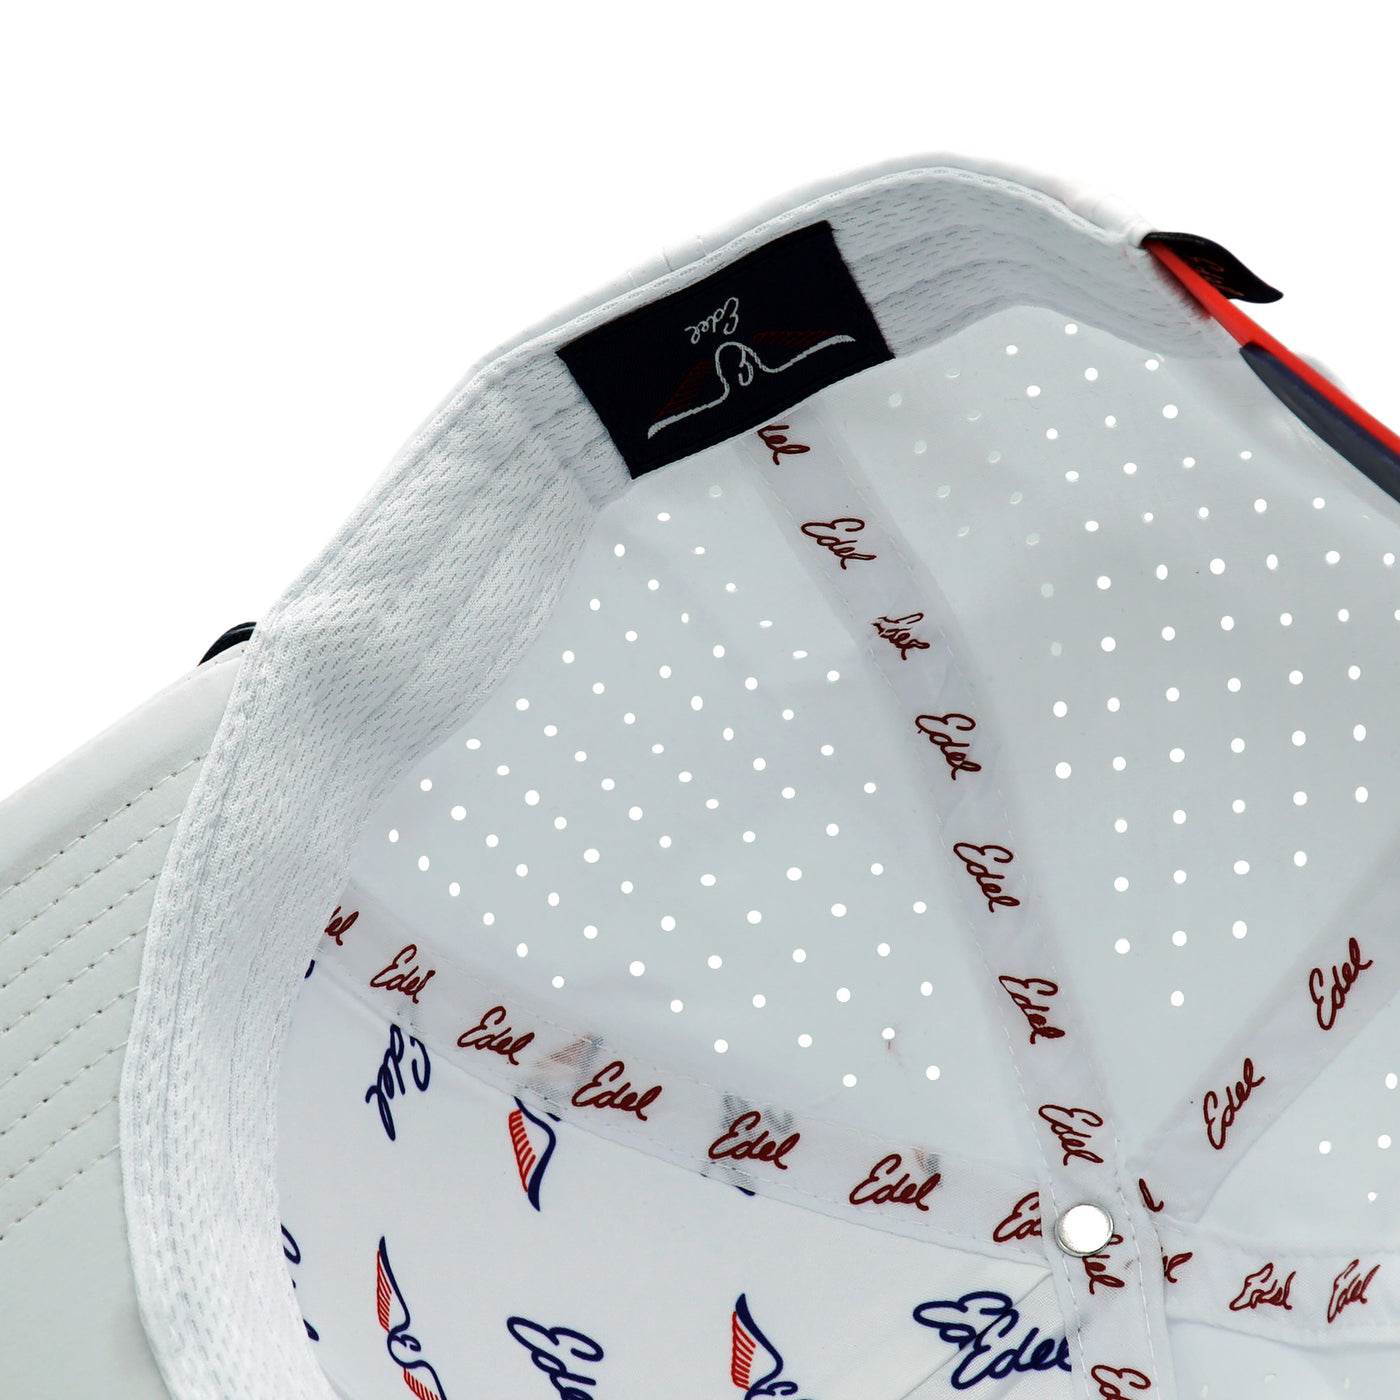 Inside of Edel Golf Raised Signature White Rope Hat with Black and Red Accents